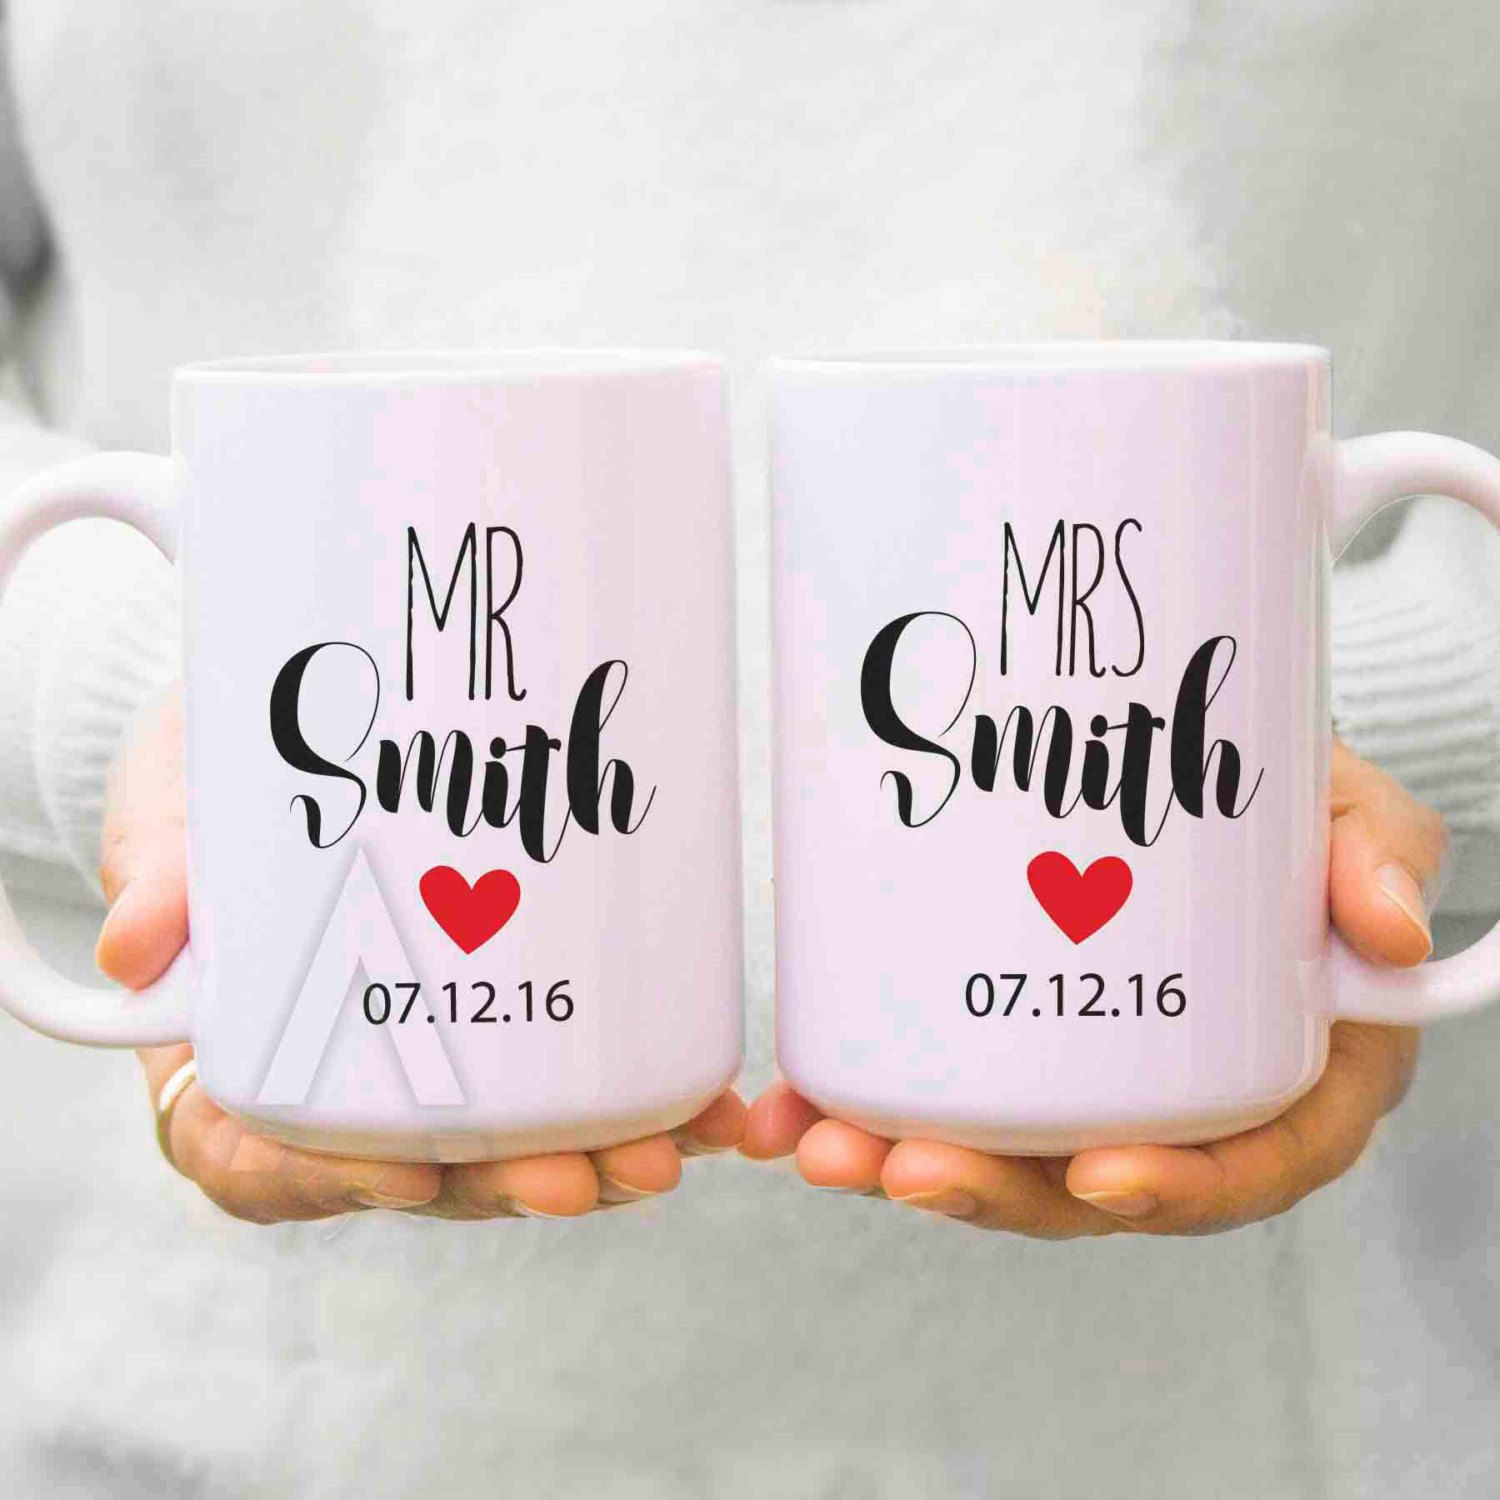 Wedding Gift Ideas For Young Couples
 Pin on Wedding engagement t for couples